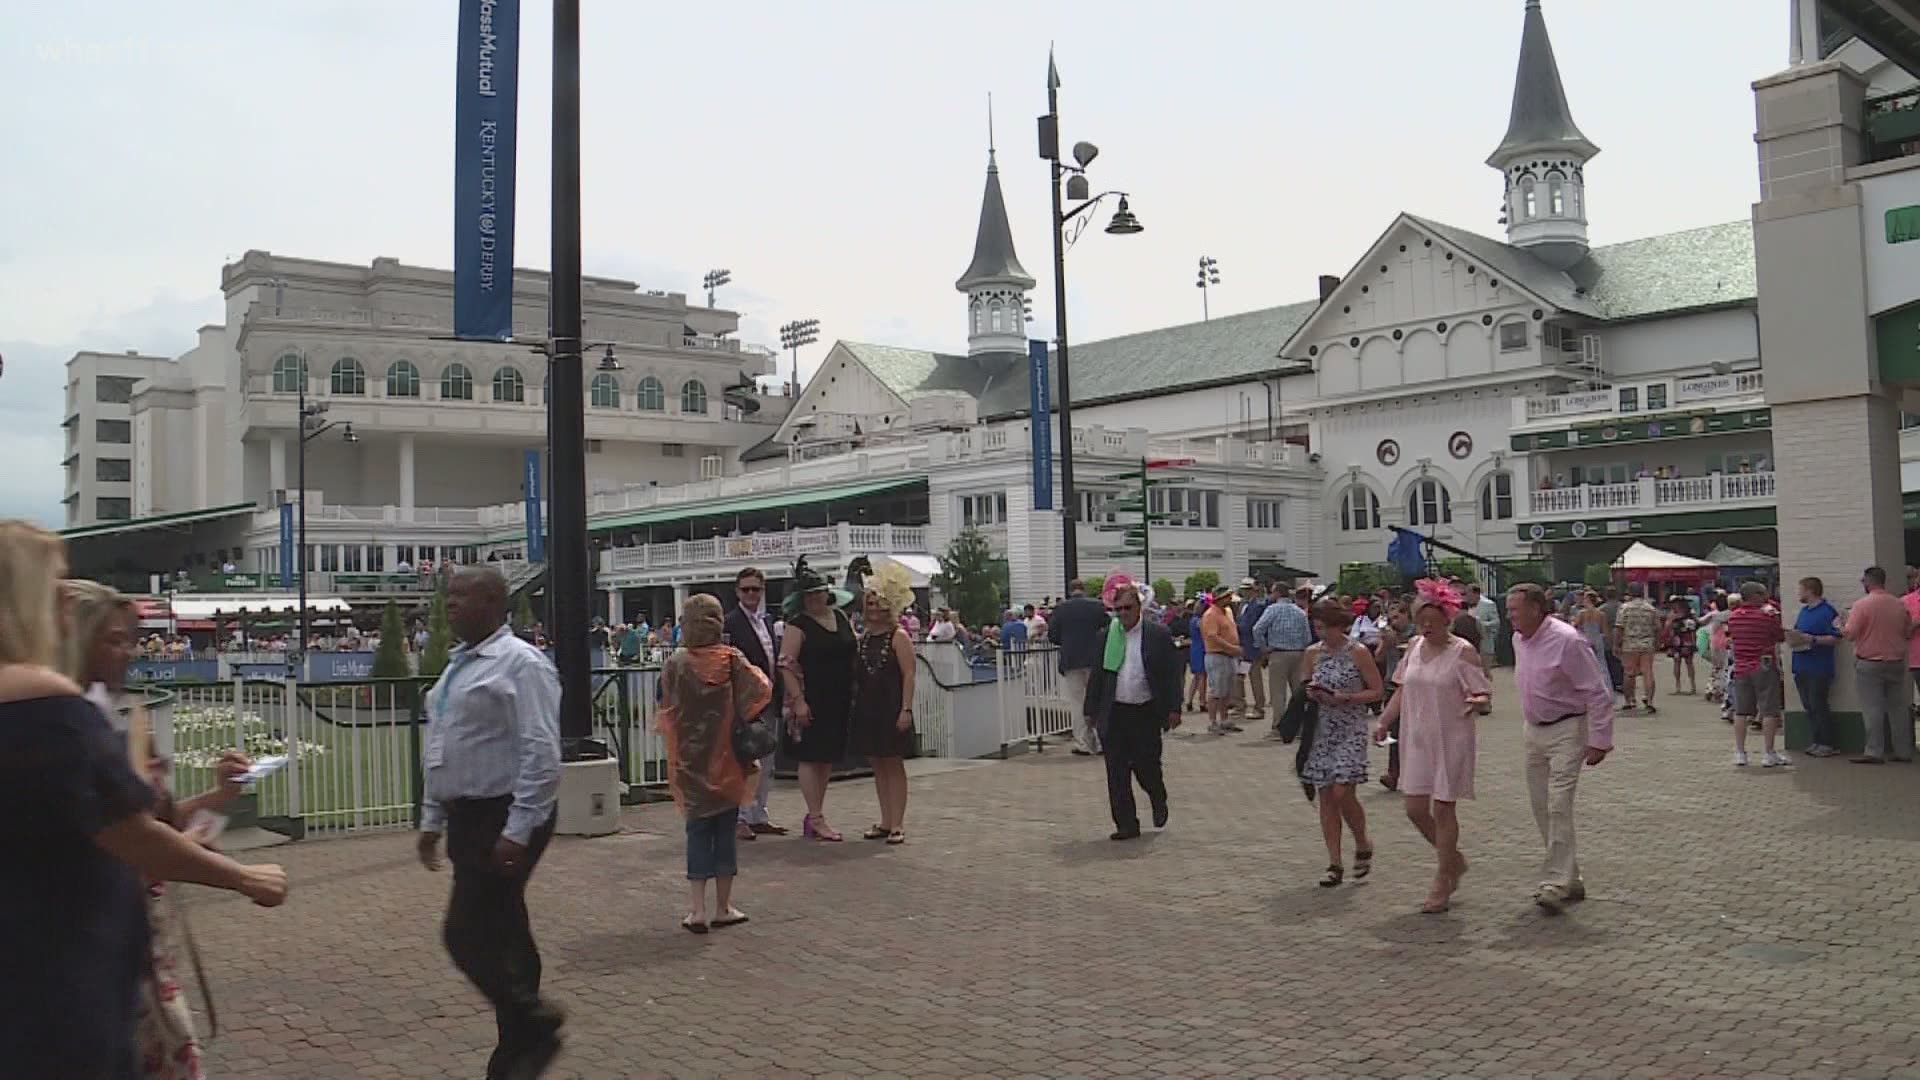 Churchill Downs says an all-inclusive ticketing package will be available for the 2021 Derby. Social distancing guidelines were also outlined.